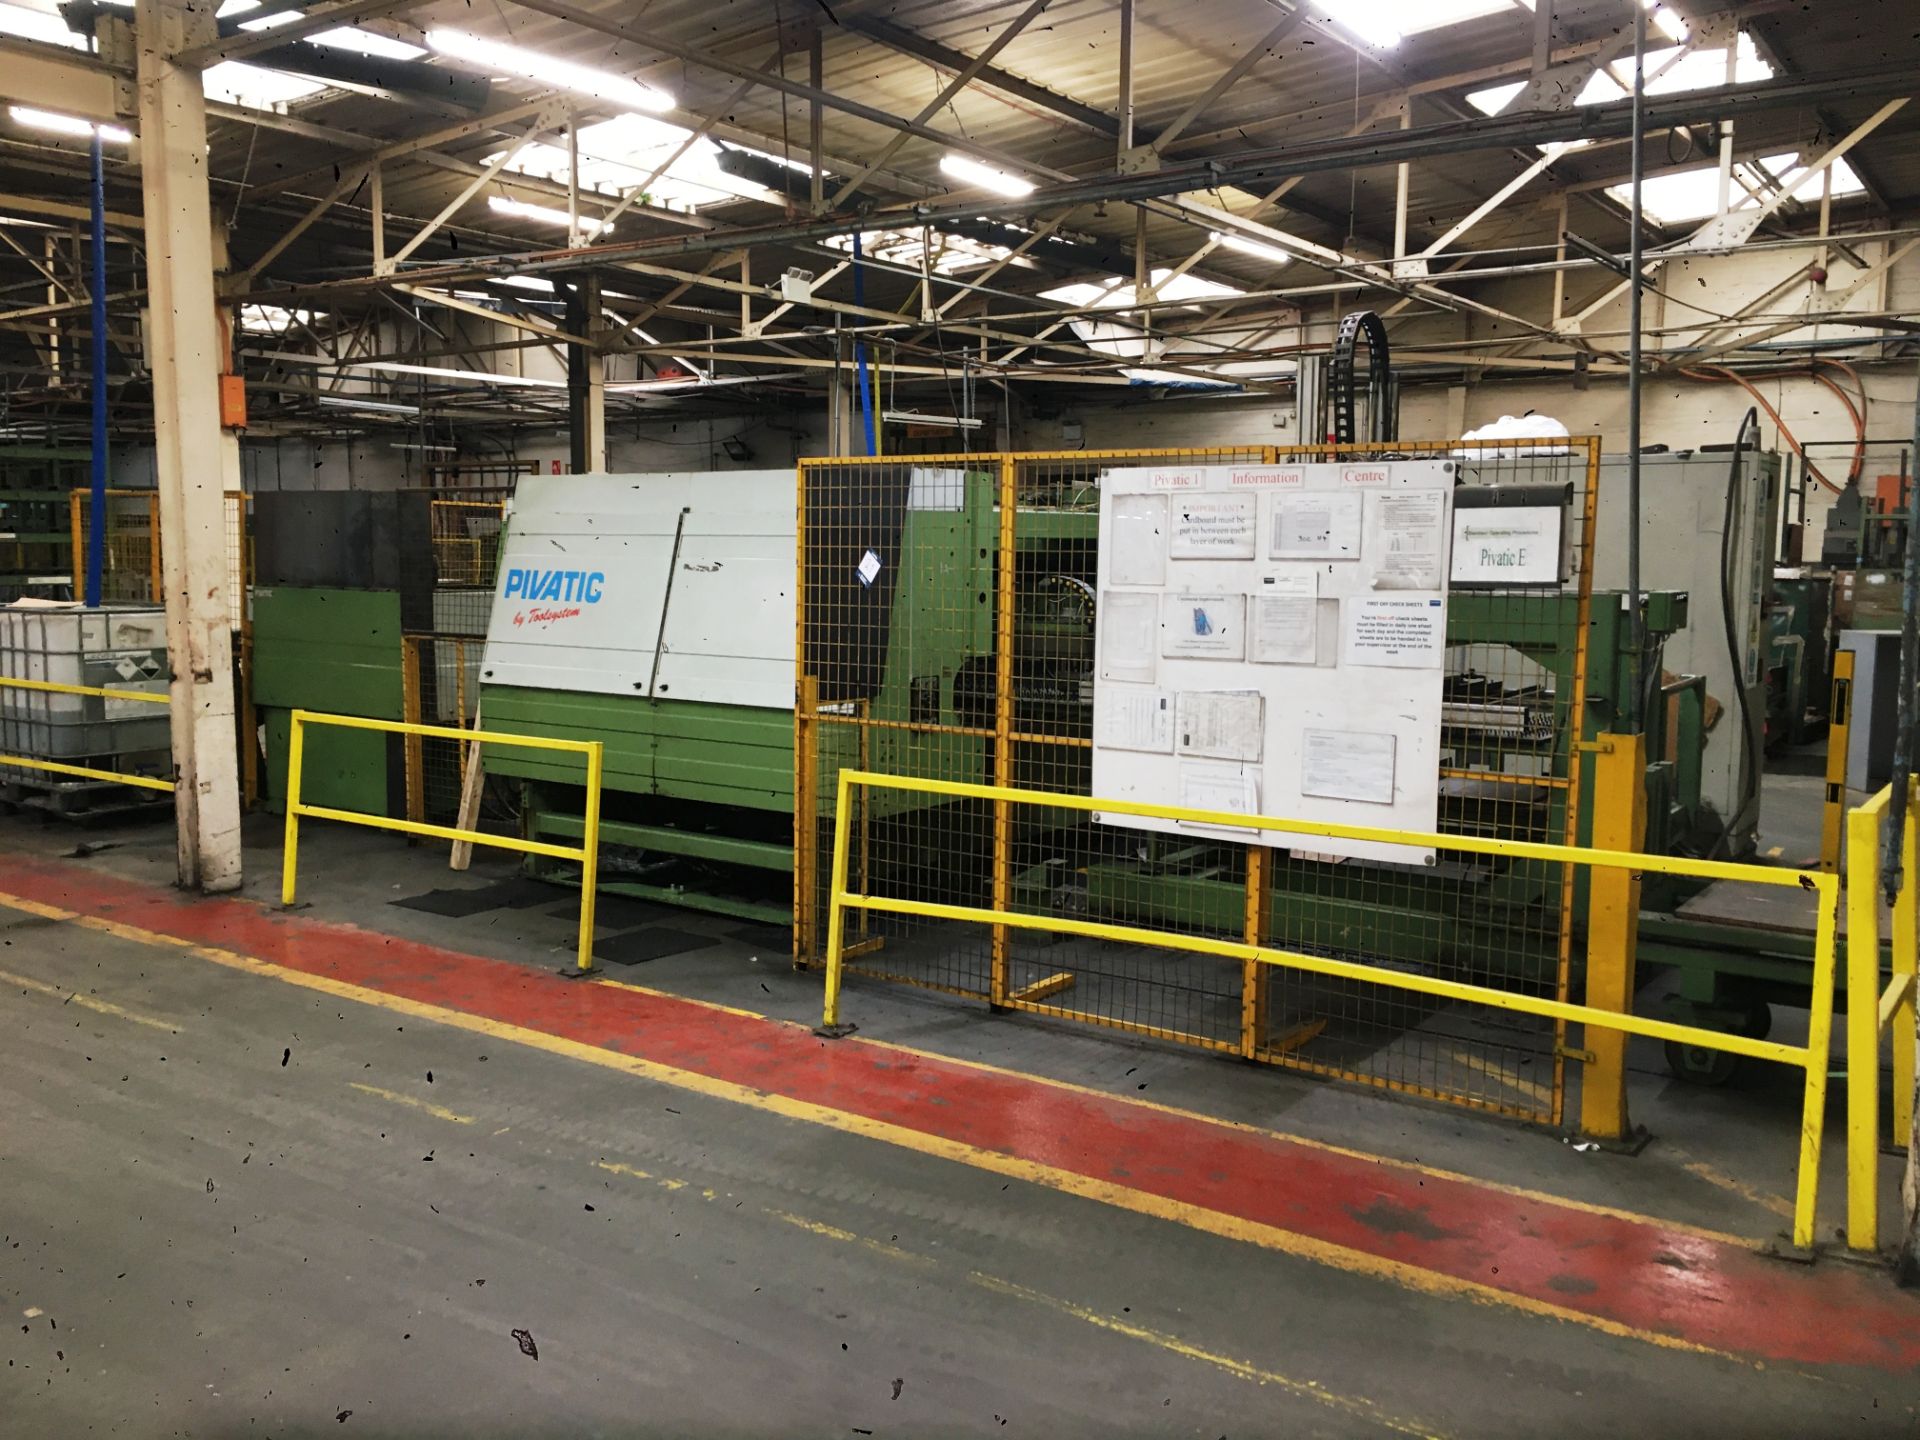 Pivatic by ToolSystem, FLN200/FSW100 bending and forming line, Serial No. 505000 (1996) comprising: